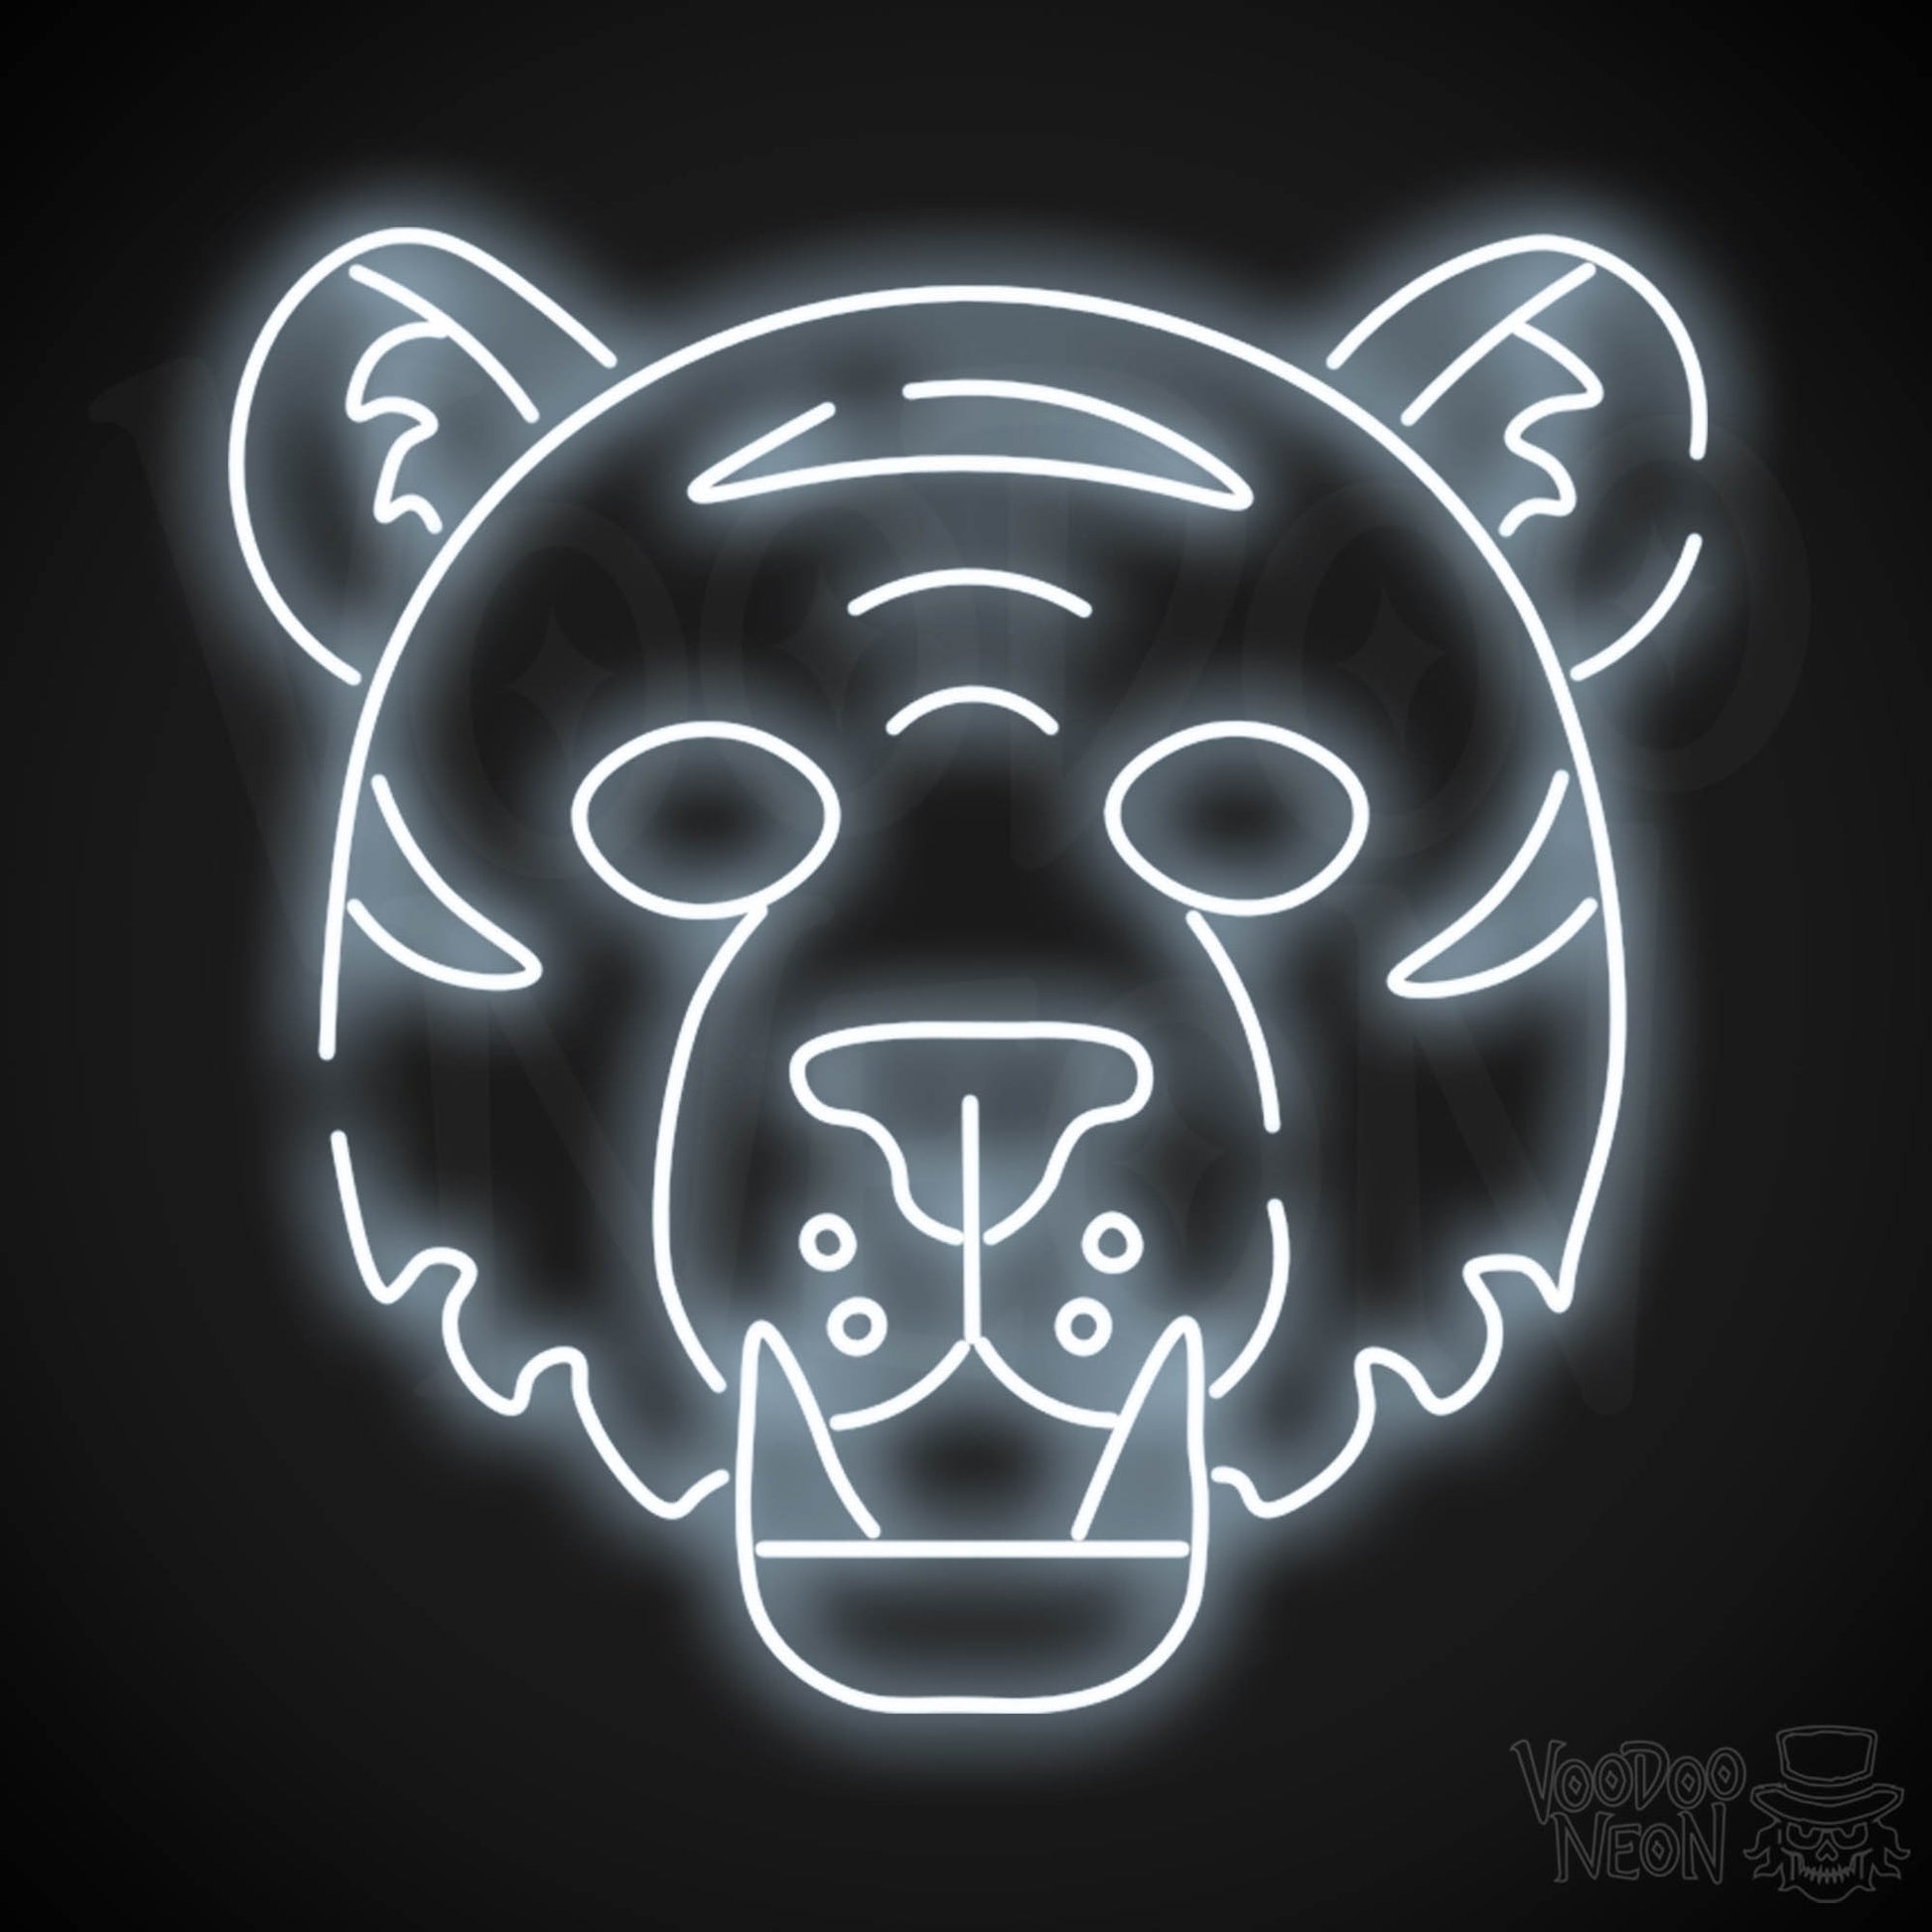 Neon Tiger Wall Art - Neon Tiger Sign - Tiger Neon Sign - LED Sign - Color Cool White